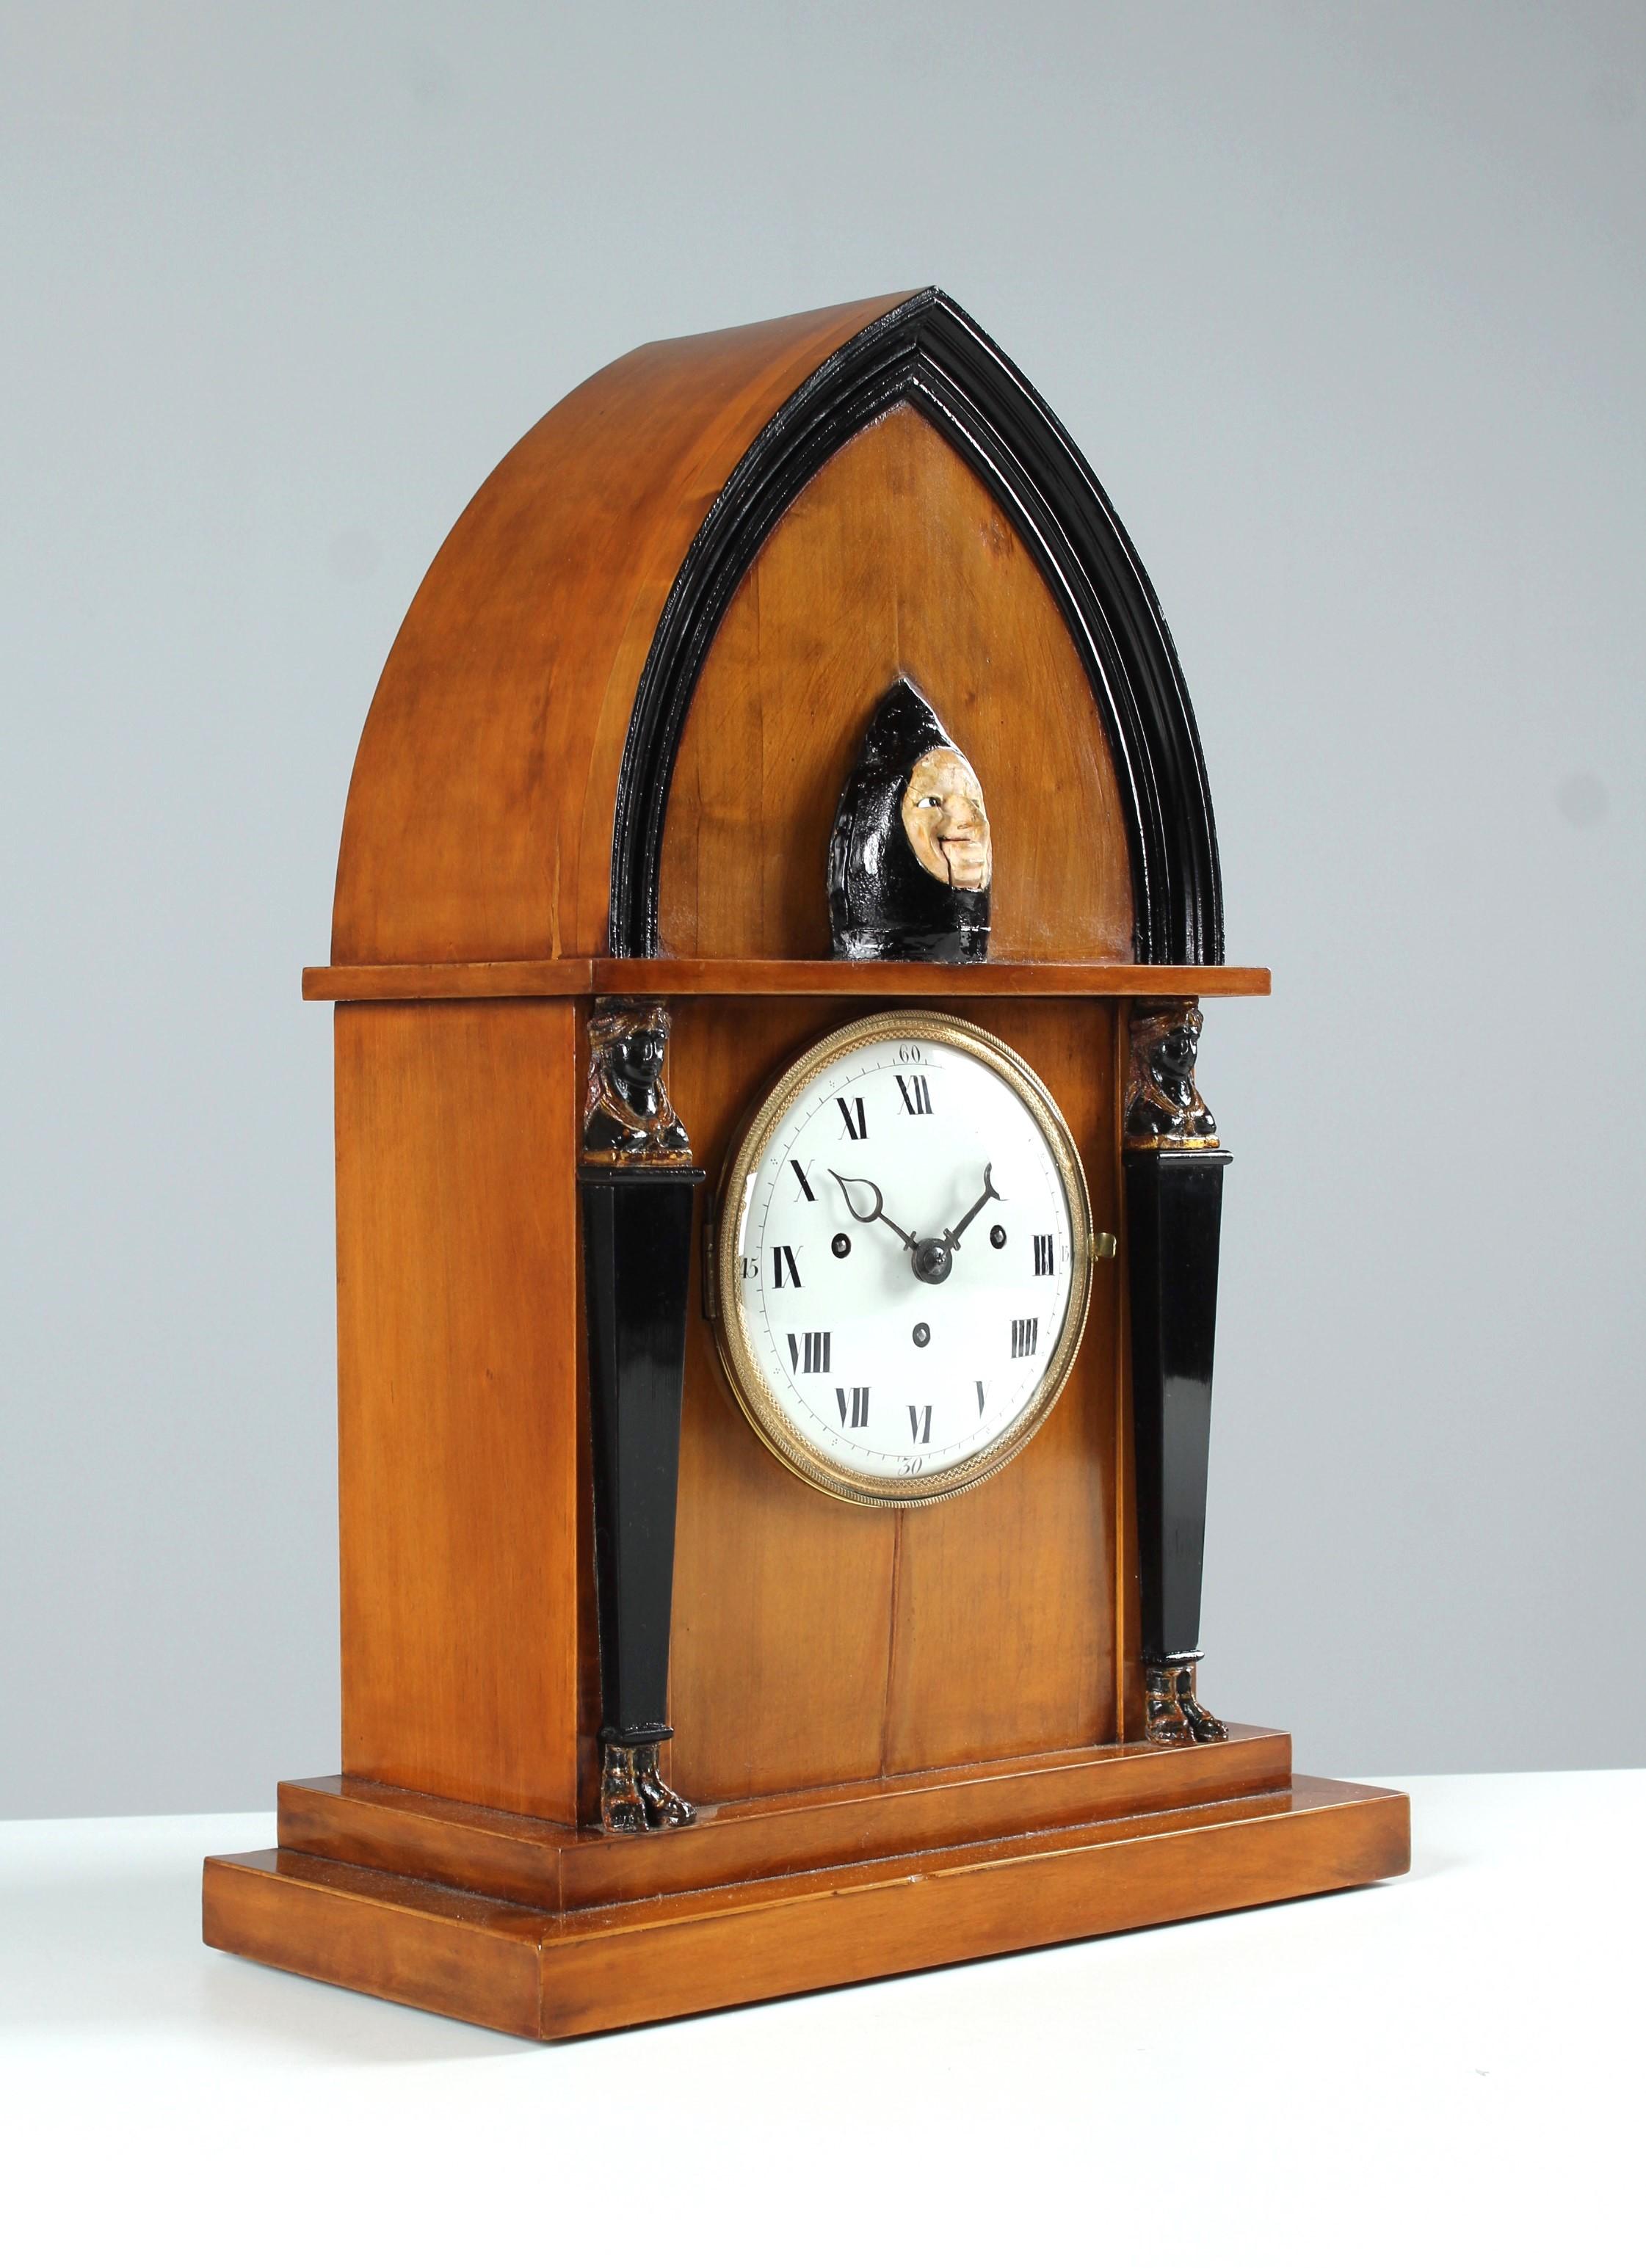 Biedermeier Fireplace Mantel Clock with Automatic

Southern Germany
Pear tree
first half 19th century

Dimensions: H x W x D: 55 x 38 x 19 cm

Description:
Interesting mantel clock from the Southern German Biedermeier period.

The